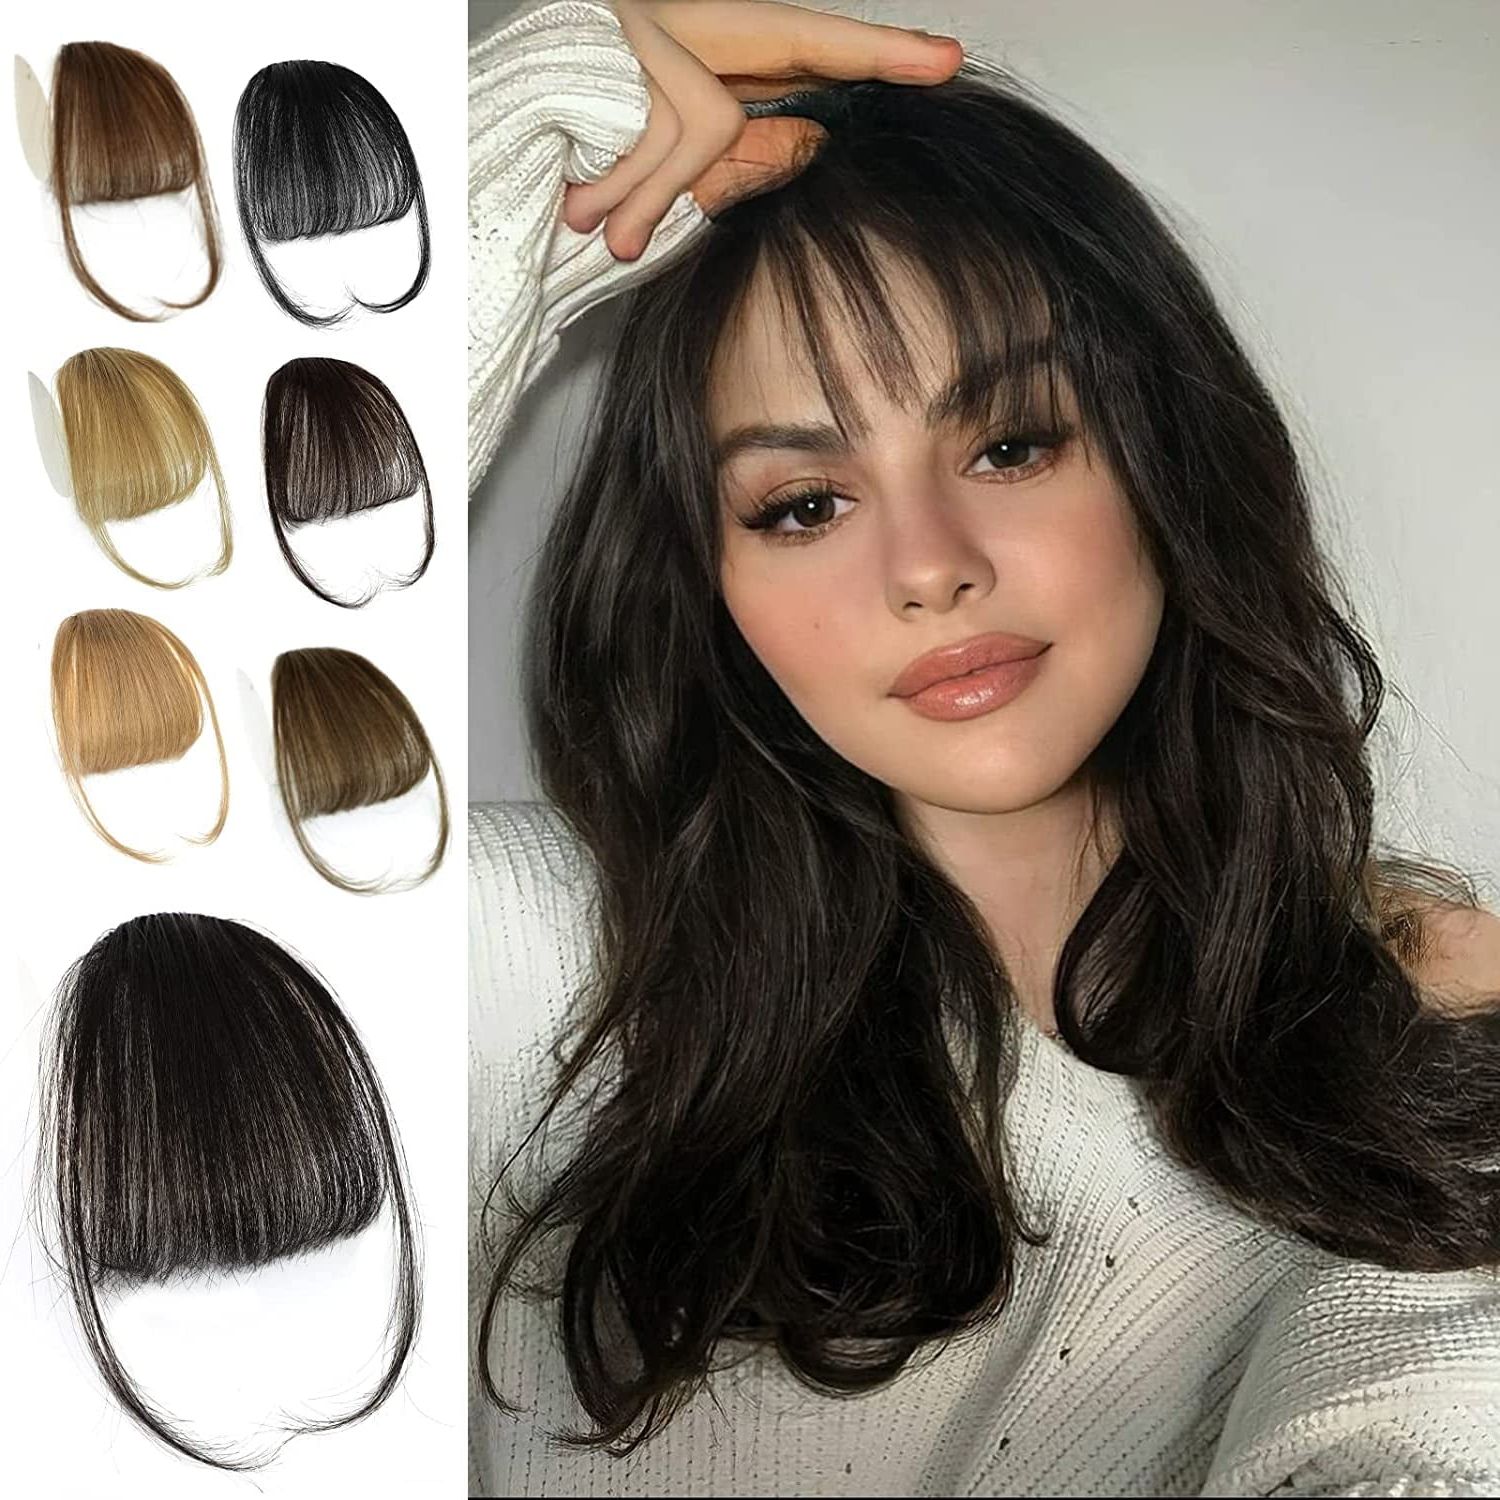 [%well Known Wispy Bangs For Medium Hair With Regard To Ustar Clip In Bangs – 100% Human Hair Wispy Bangs Clip In Hair Extensions,  Brown Black Color #1b Air Bangs Fringe With Temples Hairpieces For Women  Curved Bangs For Daily Wear – Walmart|ustar Clip In Bangs – 100% Human Hair Wispy Bangs Clip In Hair Extensions,  Brown Black Color #1b Air Bangs Fringe With Temples Hairpieces For Women  Curved Bangs For Daily Wear – Walmart Inside Well Known Wispy Bangs For Medium Hair%] (Gallery 18 of 20)